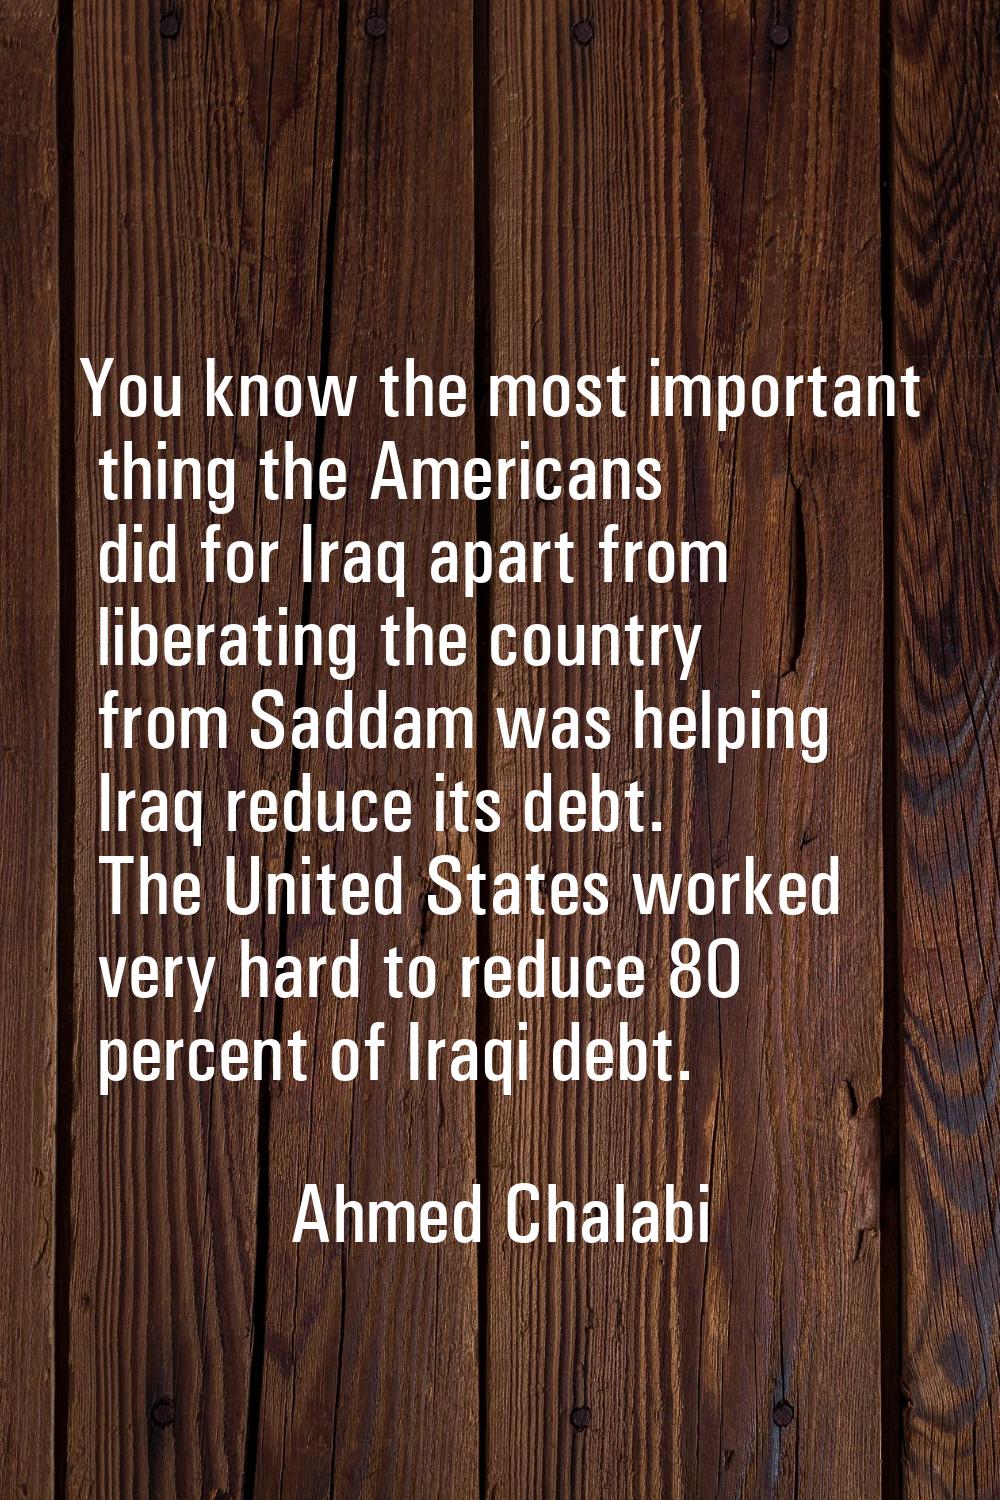 You know the most important thing the Americans did for Iraq apart from liberating the country from